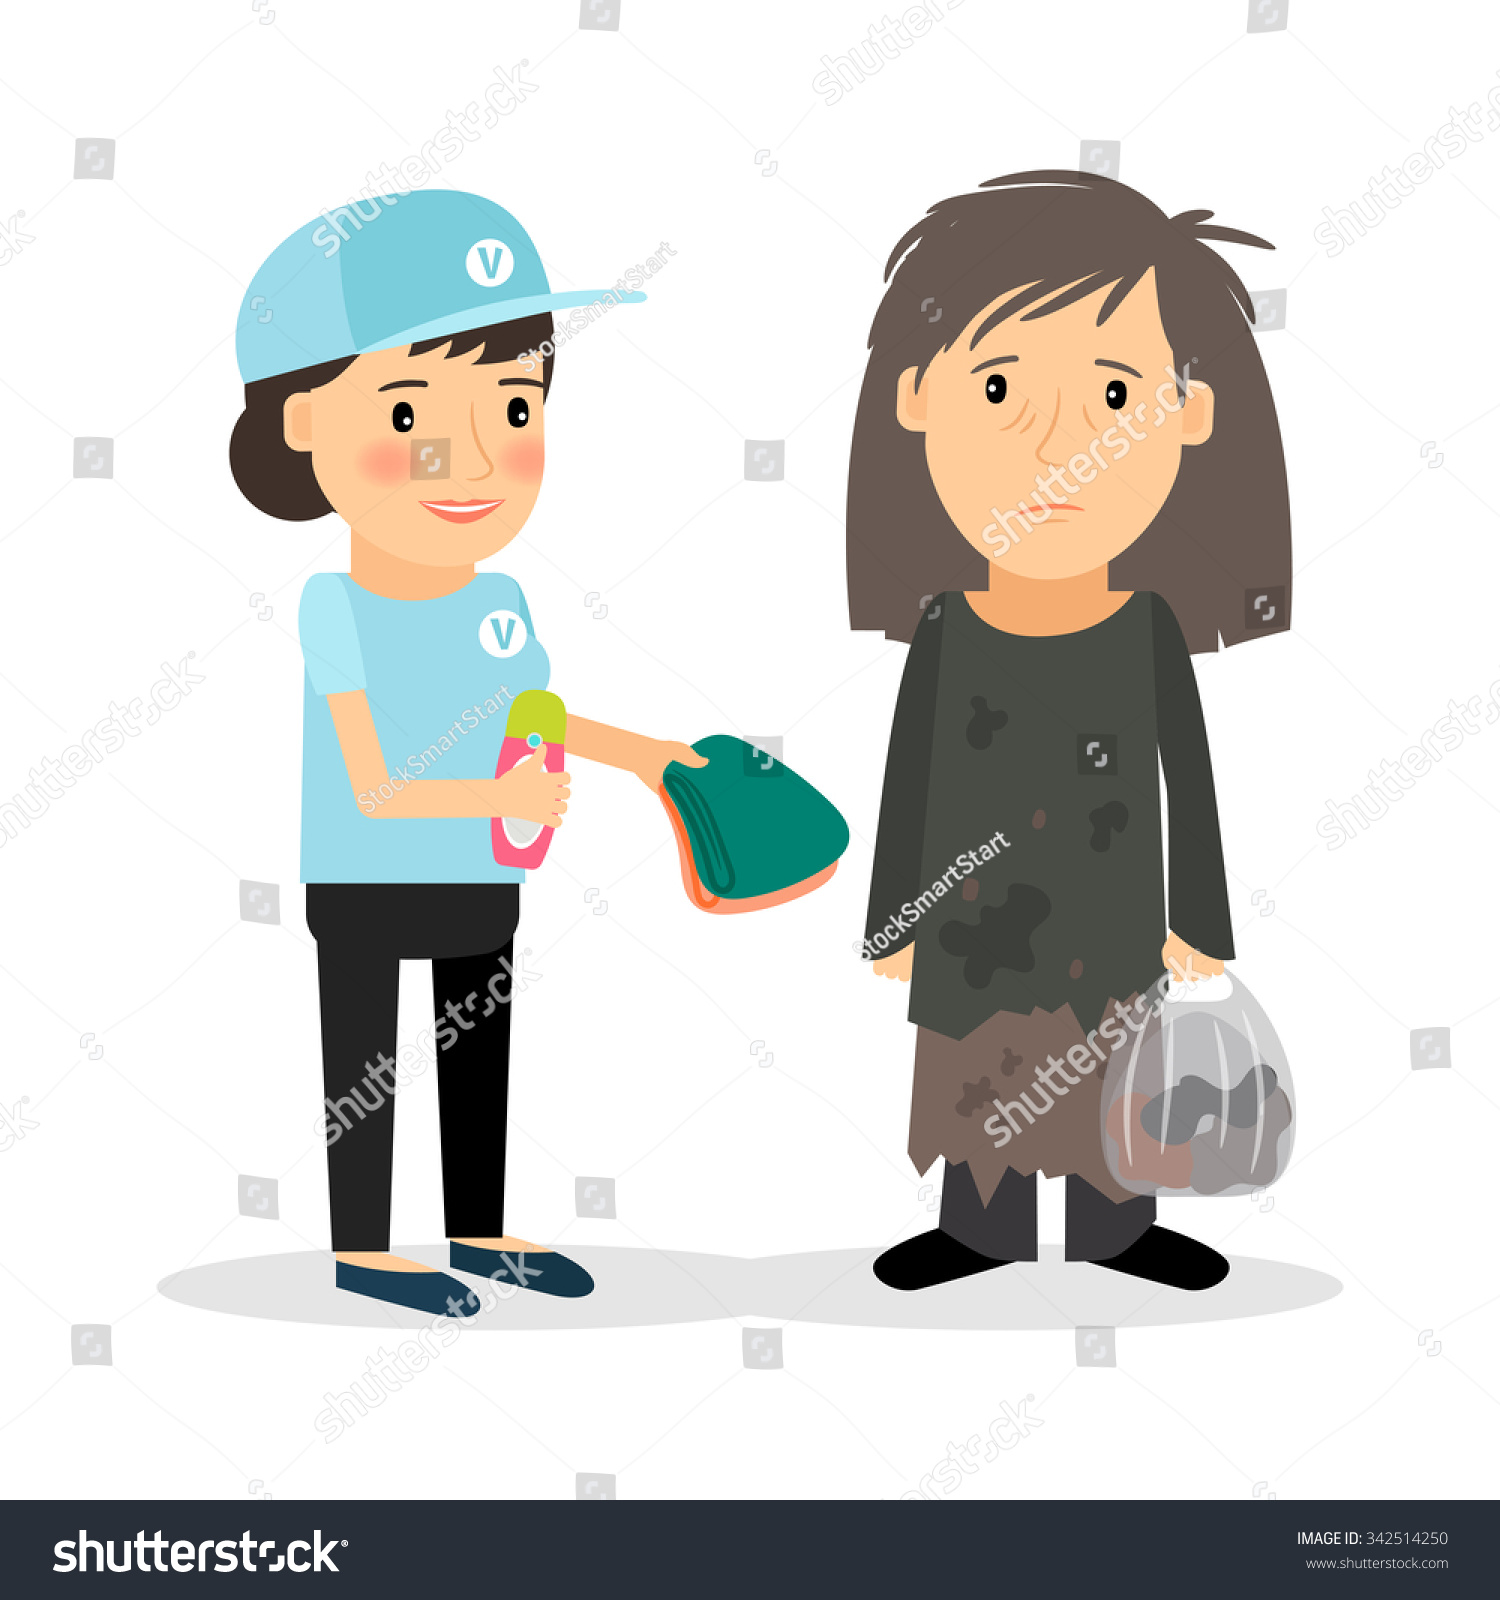 SVG of Caring for homeless and refugees. Helping people. Vector illustration. svg